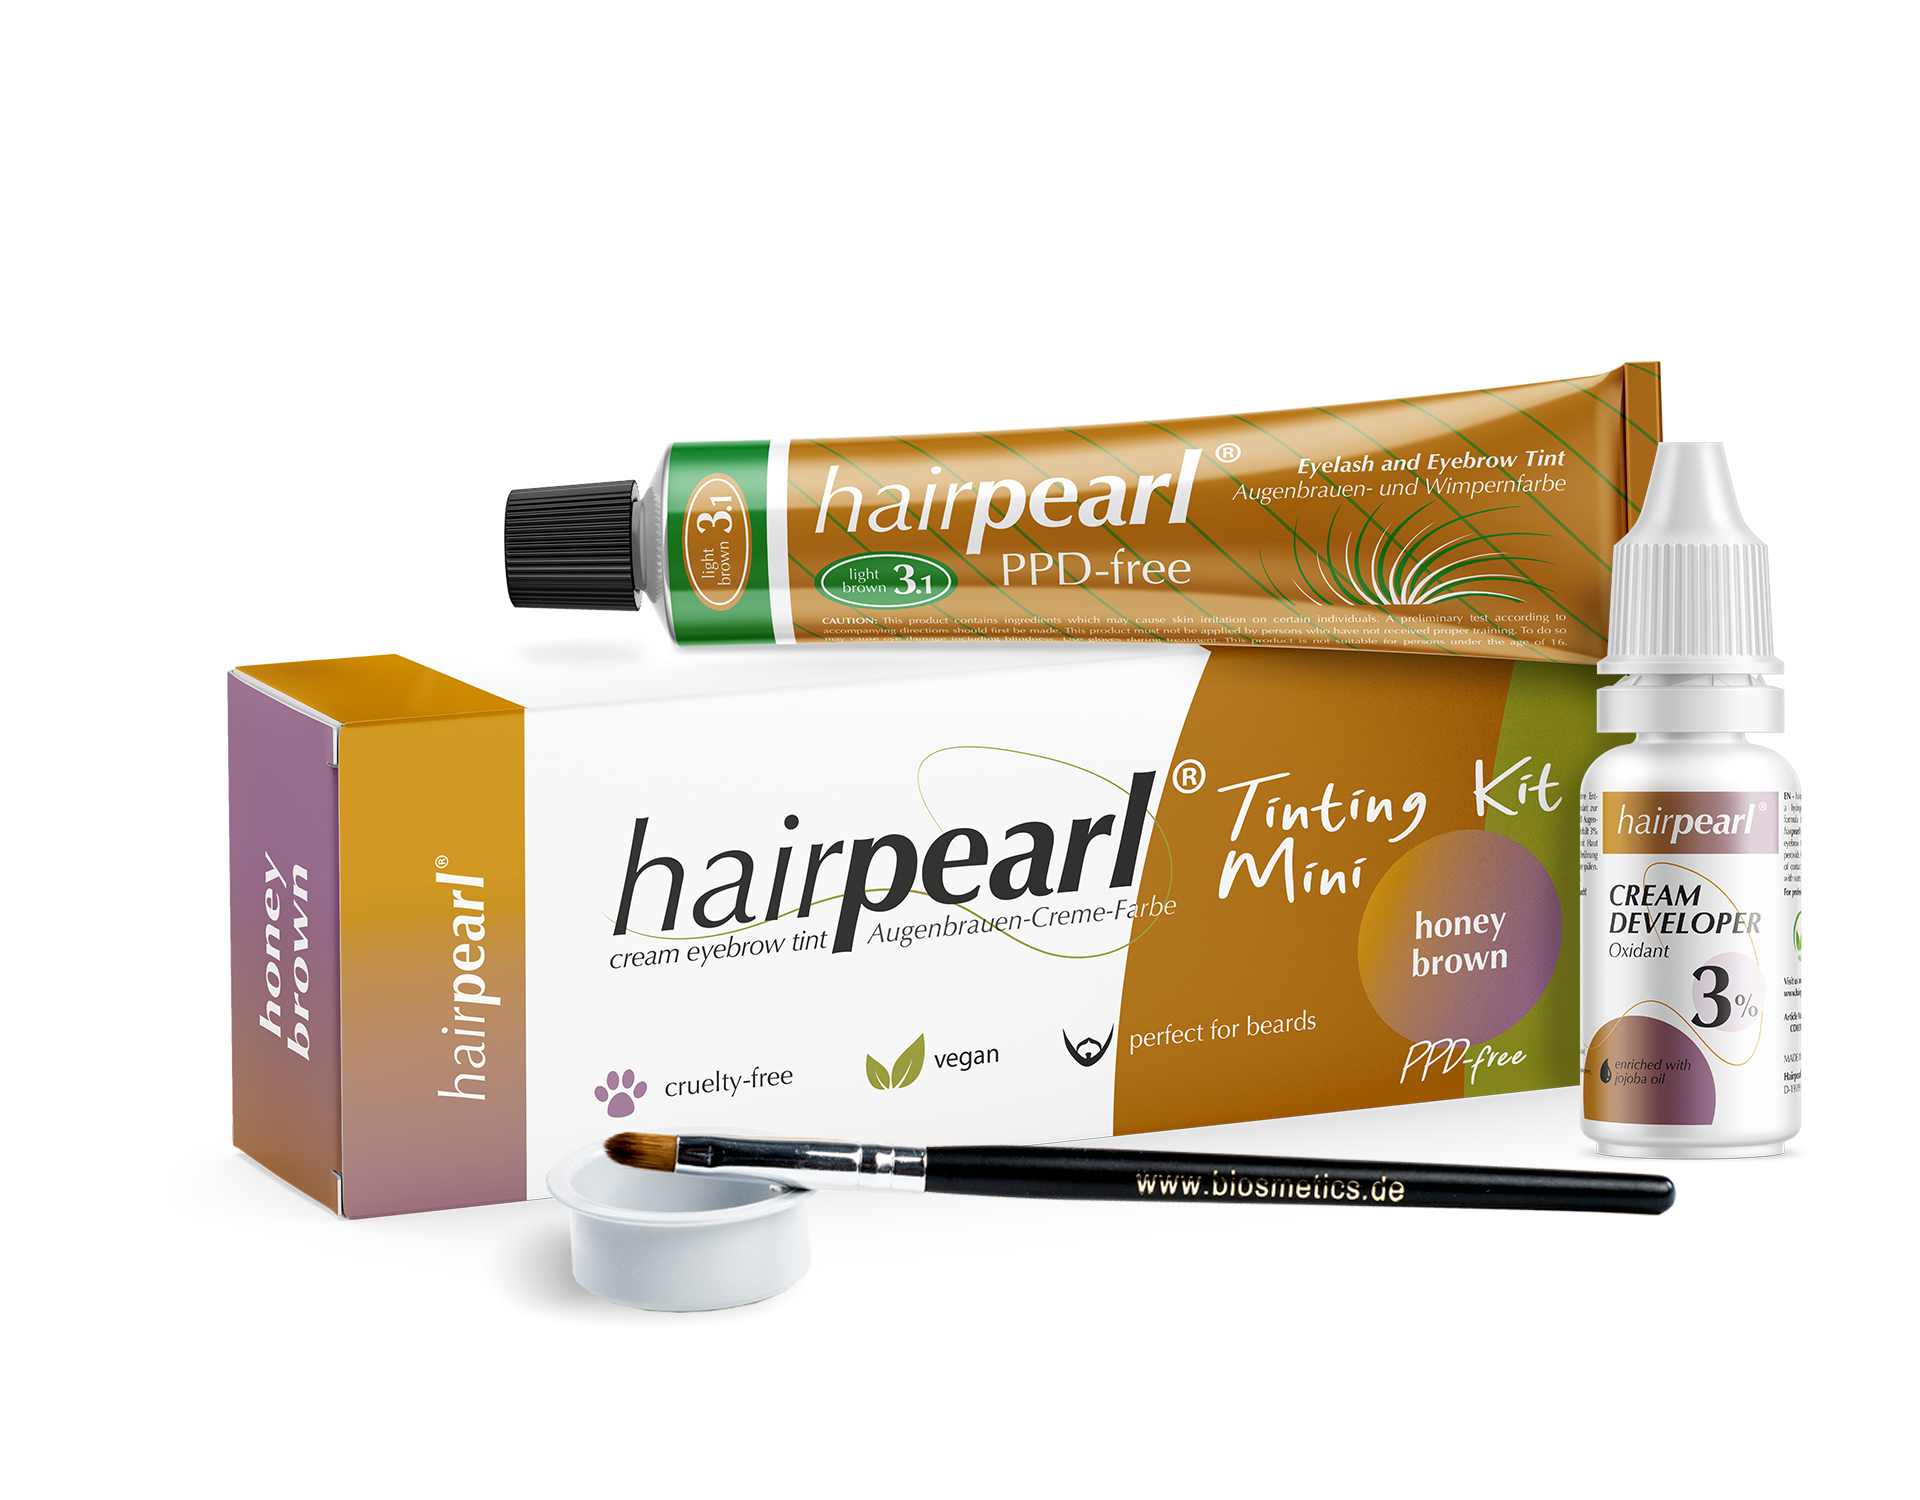 hairpearl PPD-free “Tinting Kit Mini” – Honey Brown (light brown